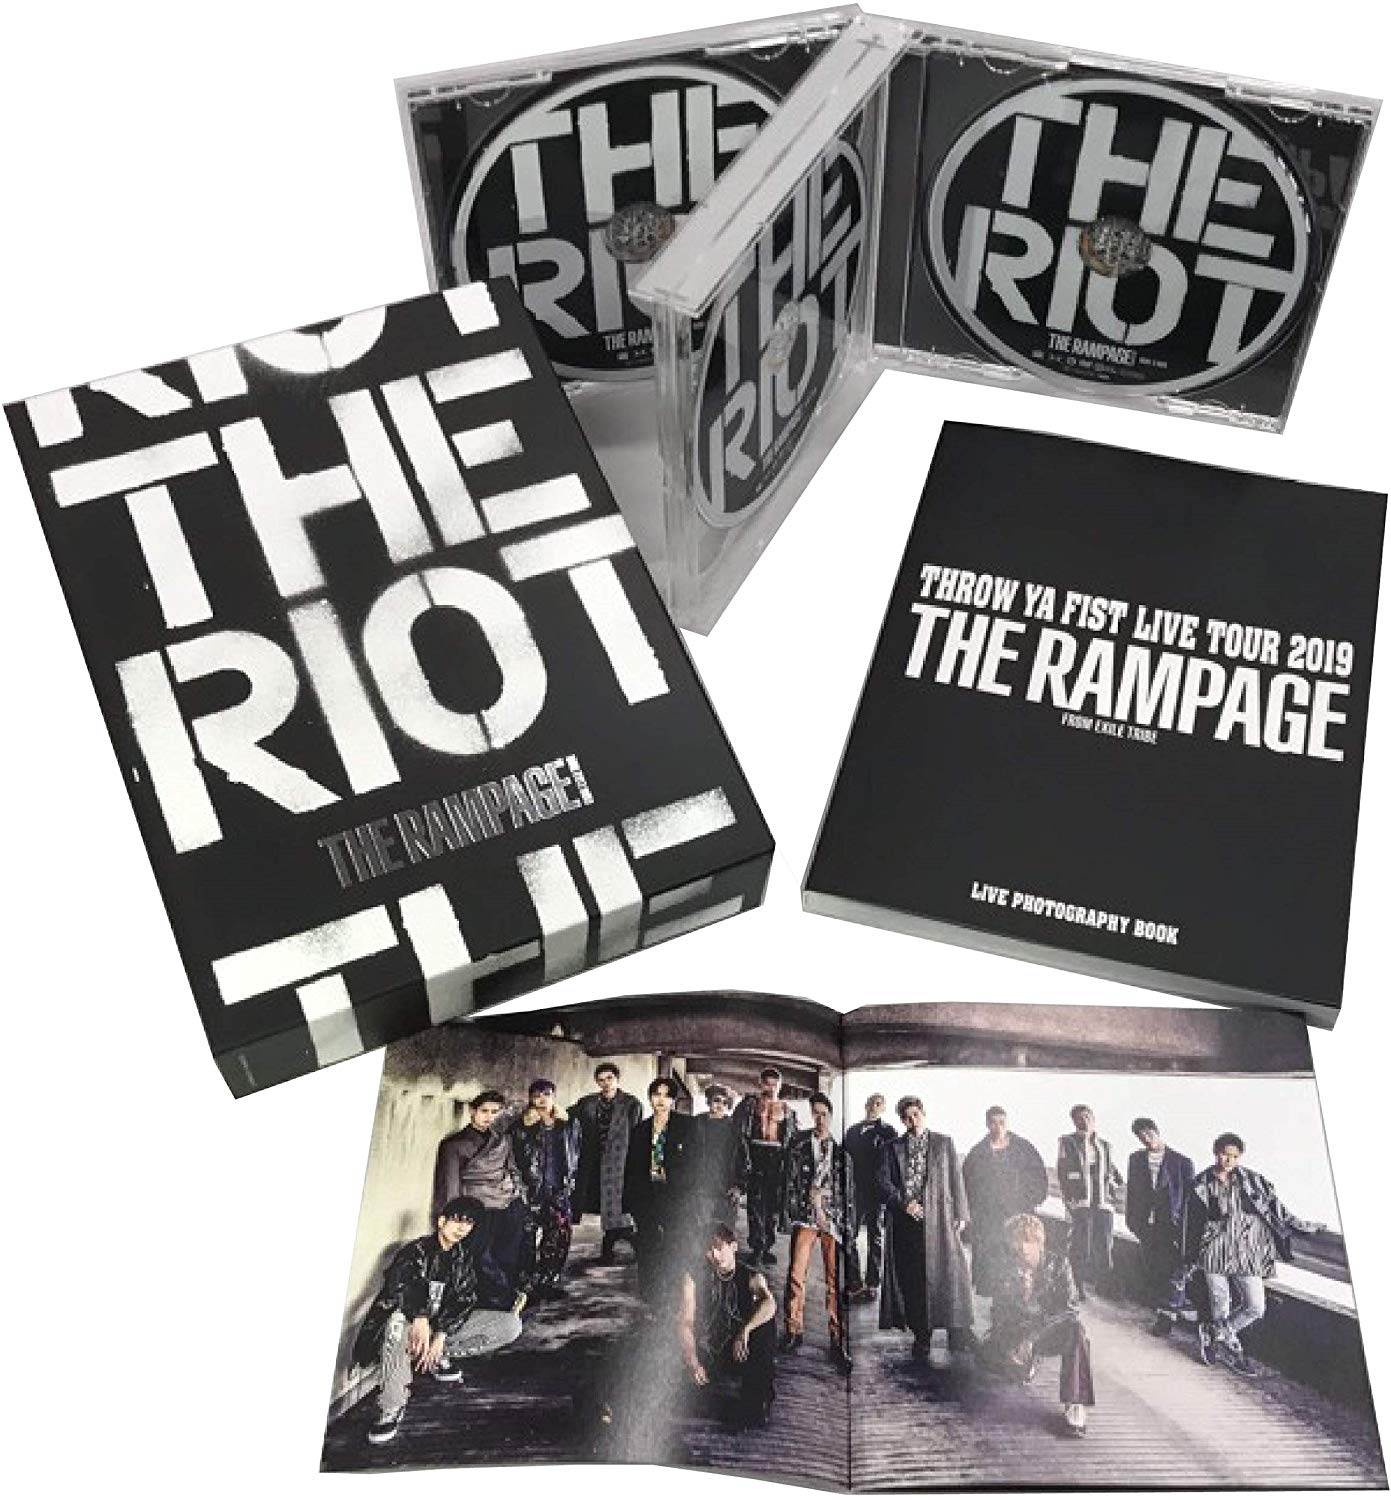 THE RAMPAGE RIOT CD